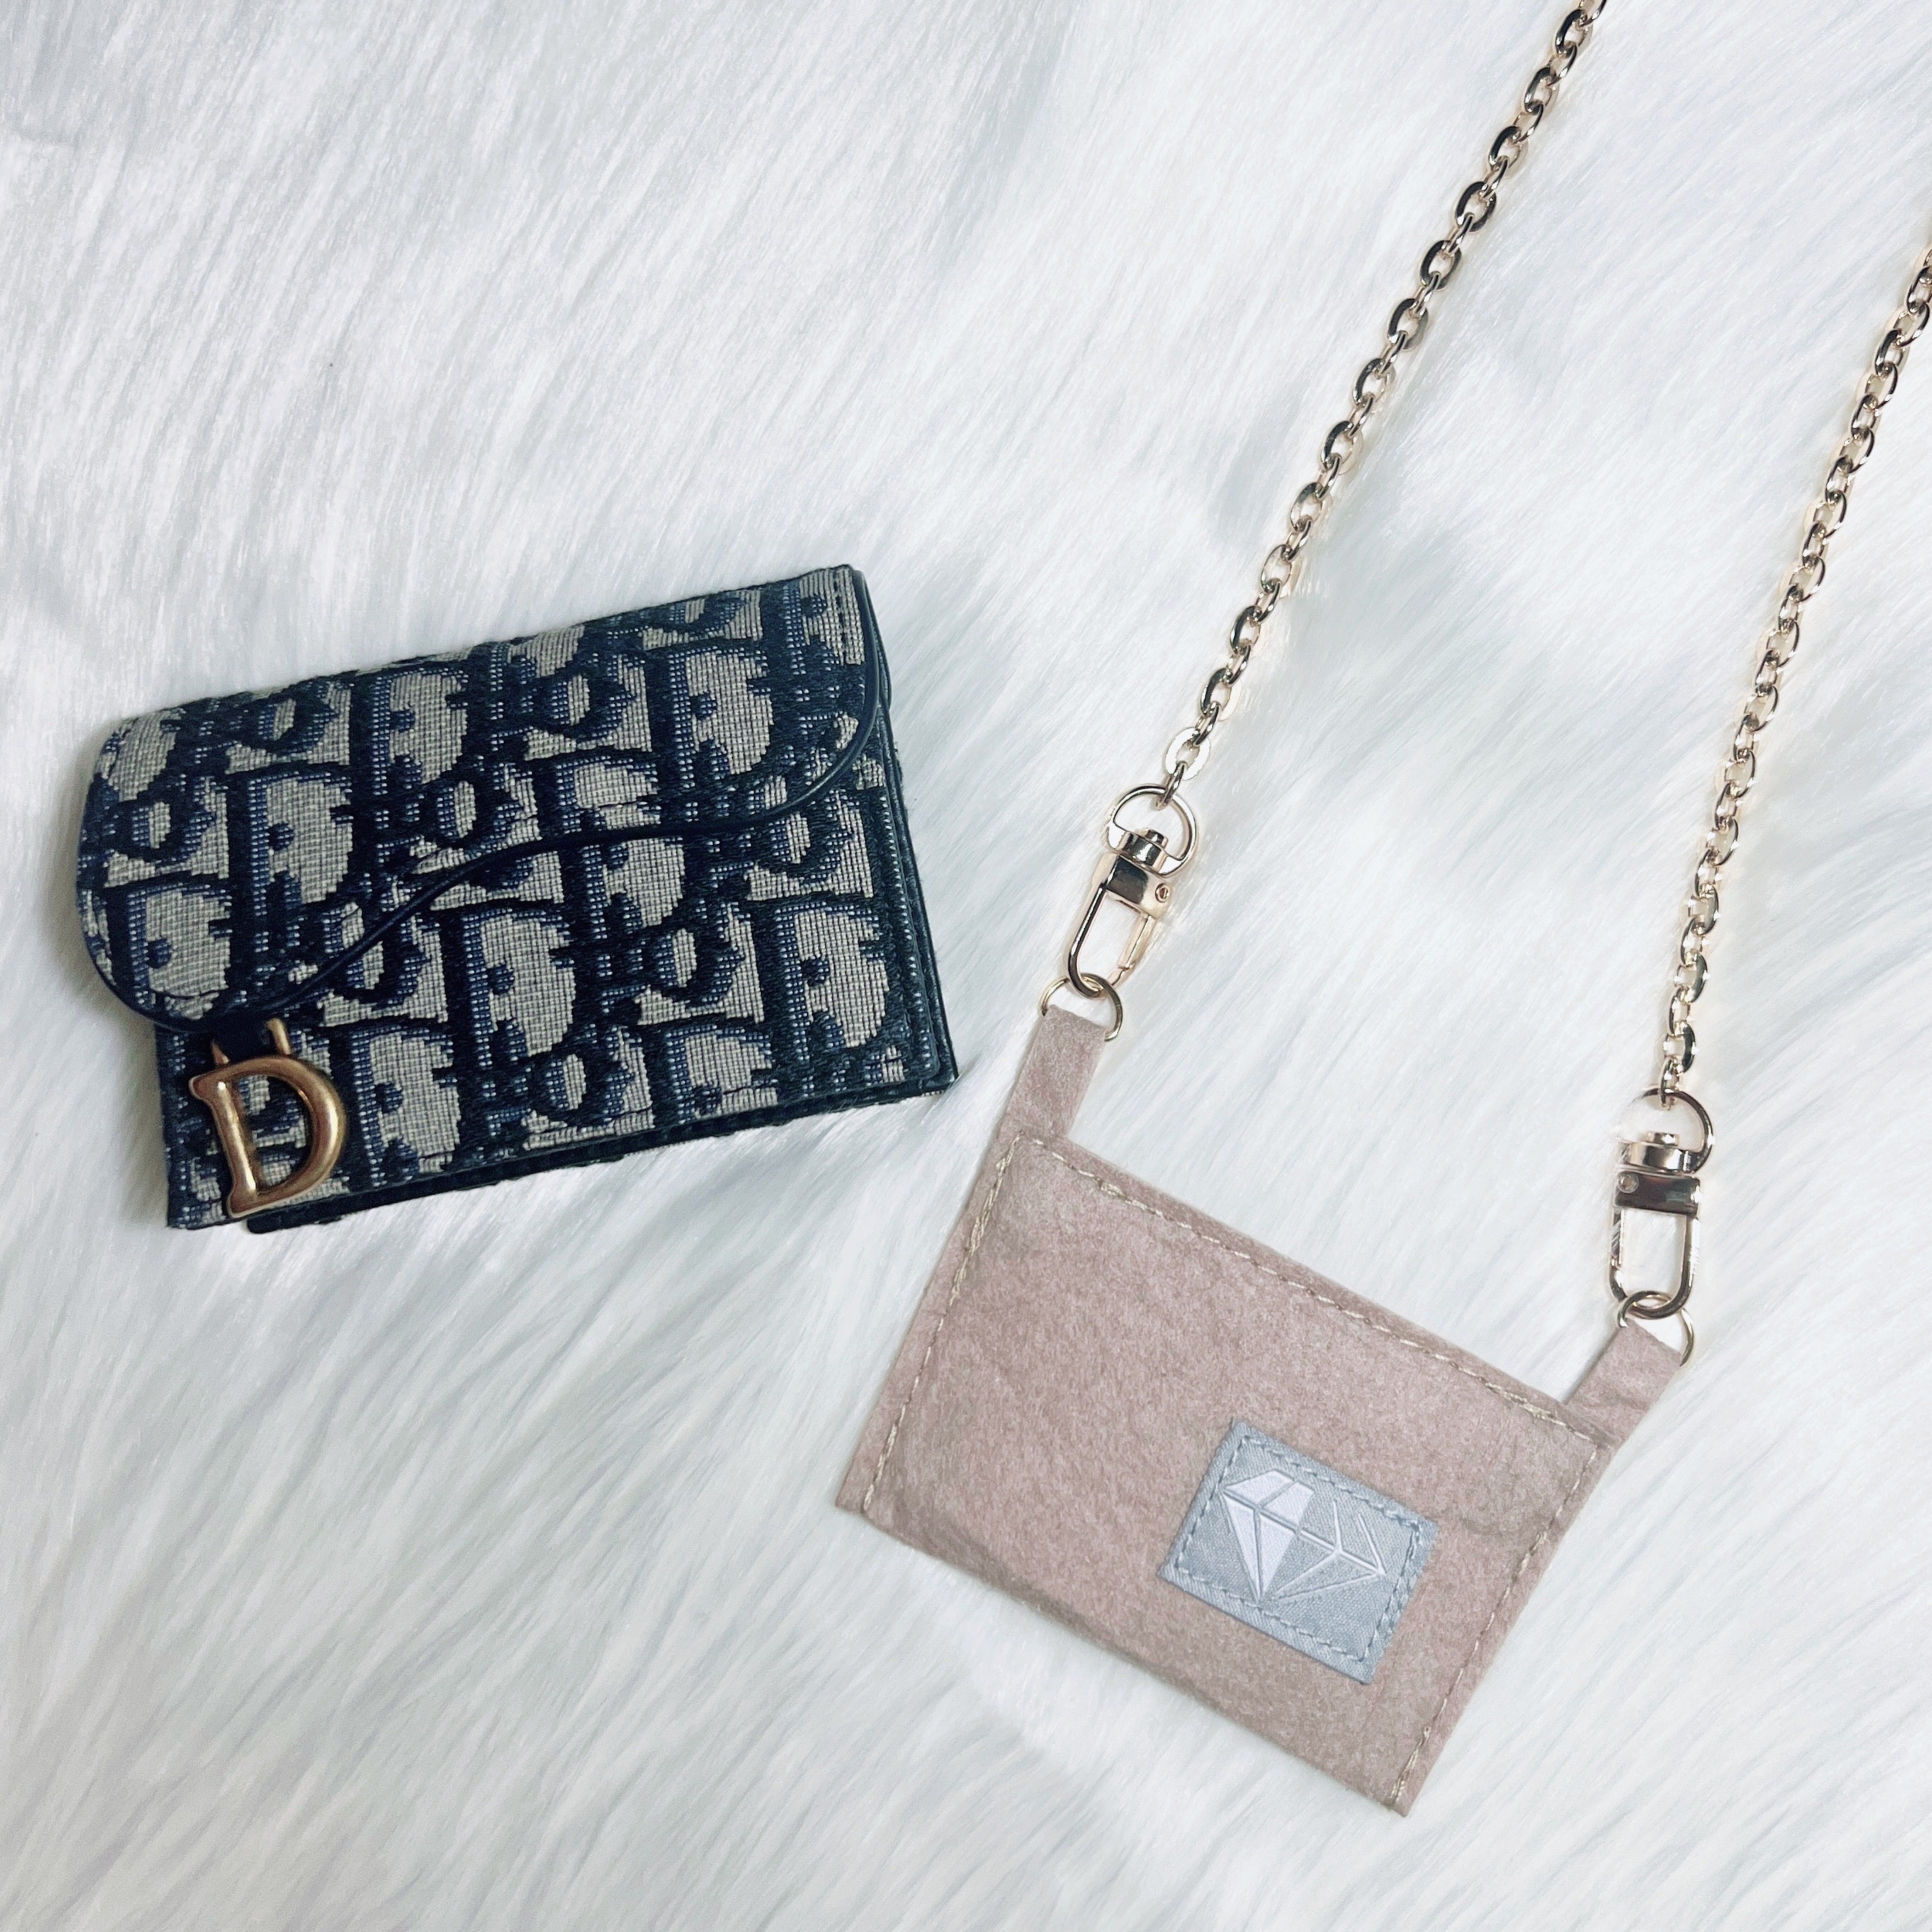 LV Sarah Wallet Conversion Kit – FromHER